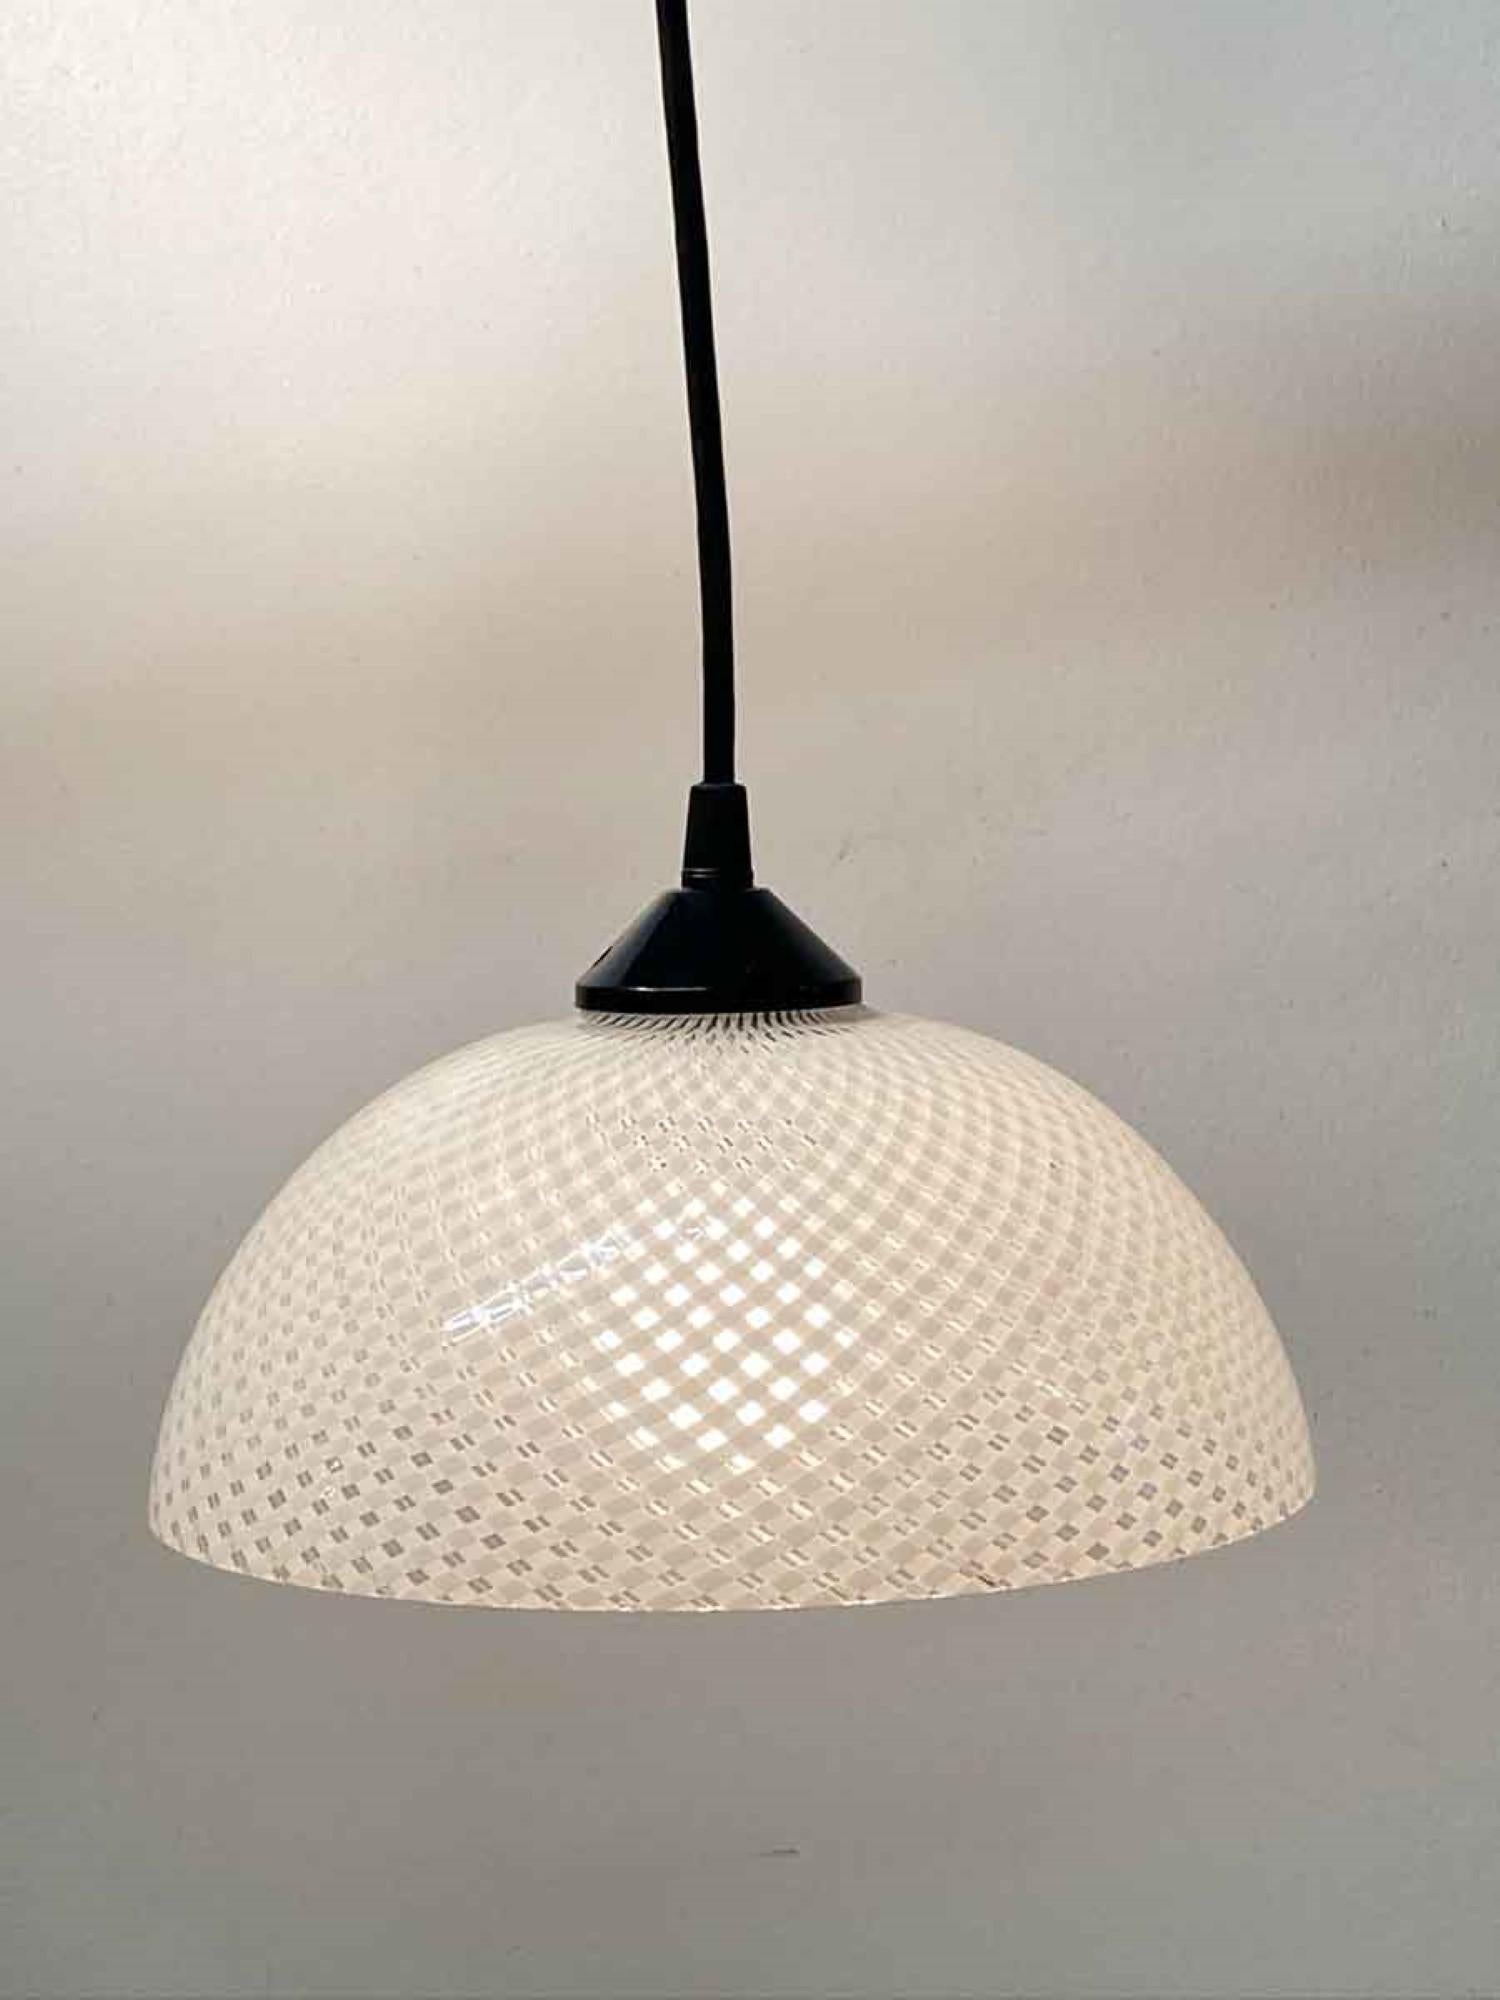 1980s Mid-Century Modern style hand blown white and clear Vetri Murano glass shade fitted with a black cord to make a petite pendant light. Made in Italy. Price includes restoration. This can be seen at our 400 Gilligan St location in Scranton. PA.